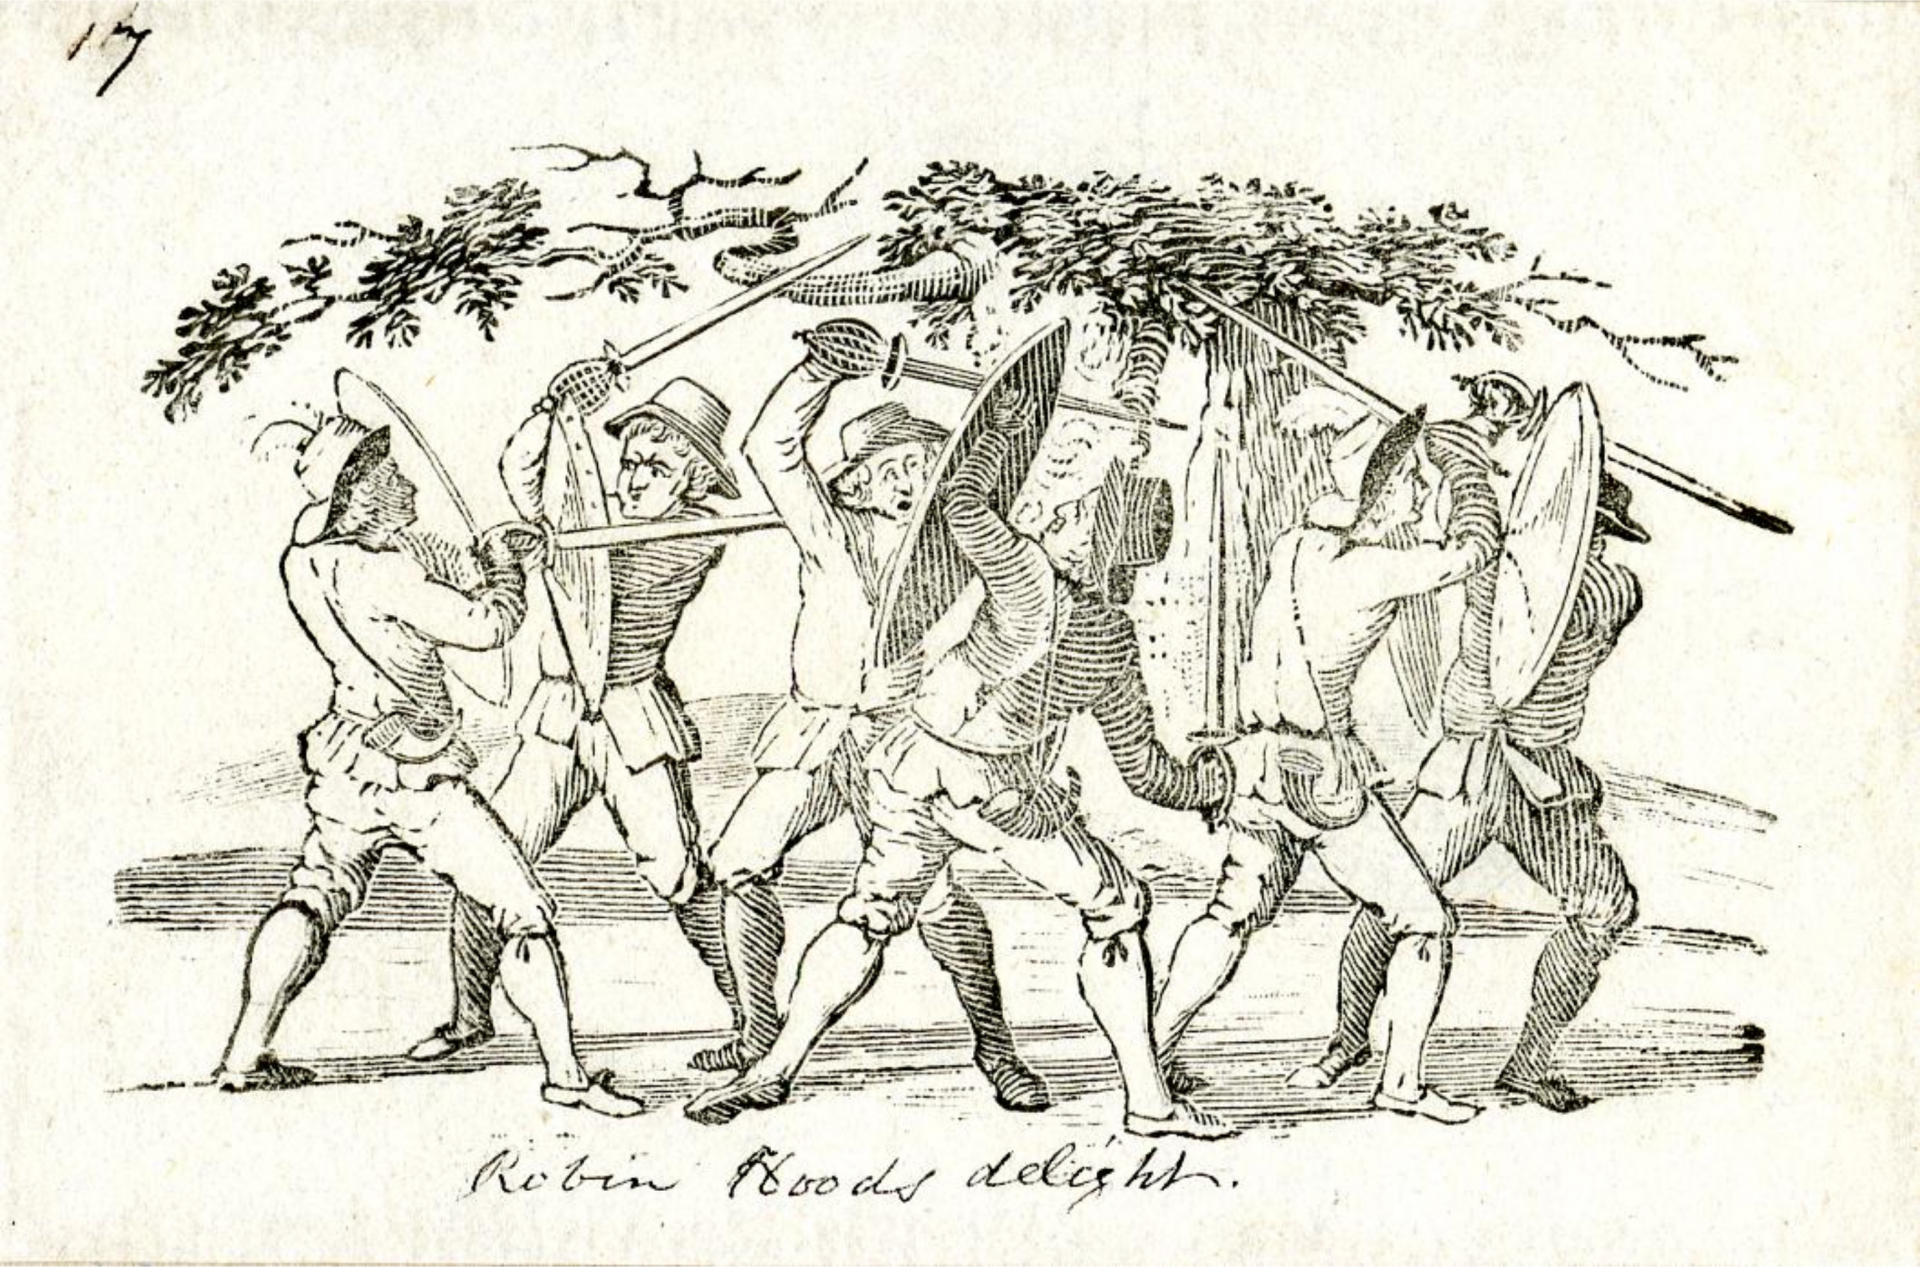 A wood-engraving of Robin Hood, Little John and William Scarelock fighting with swords three keepers of the deer of King Henry; old tree behind.